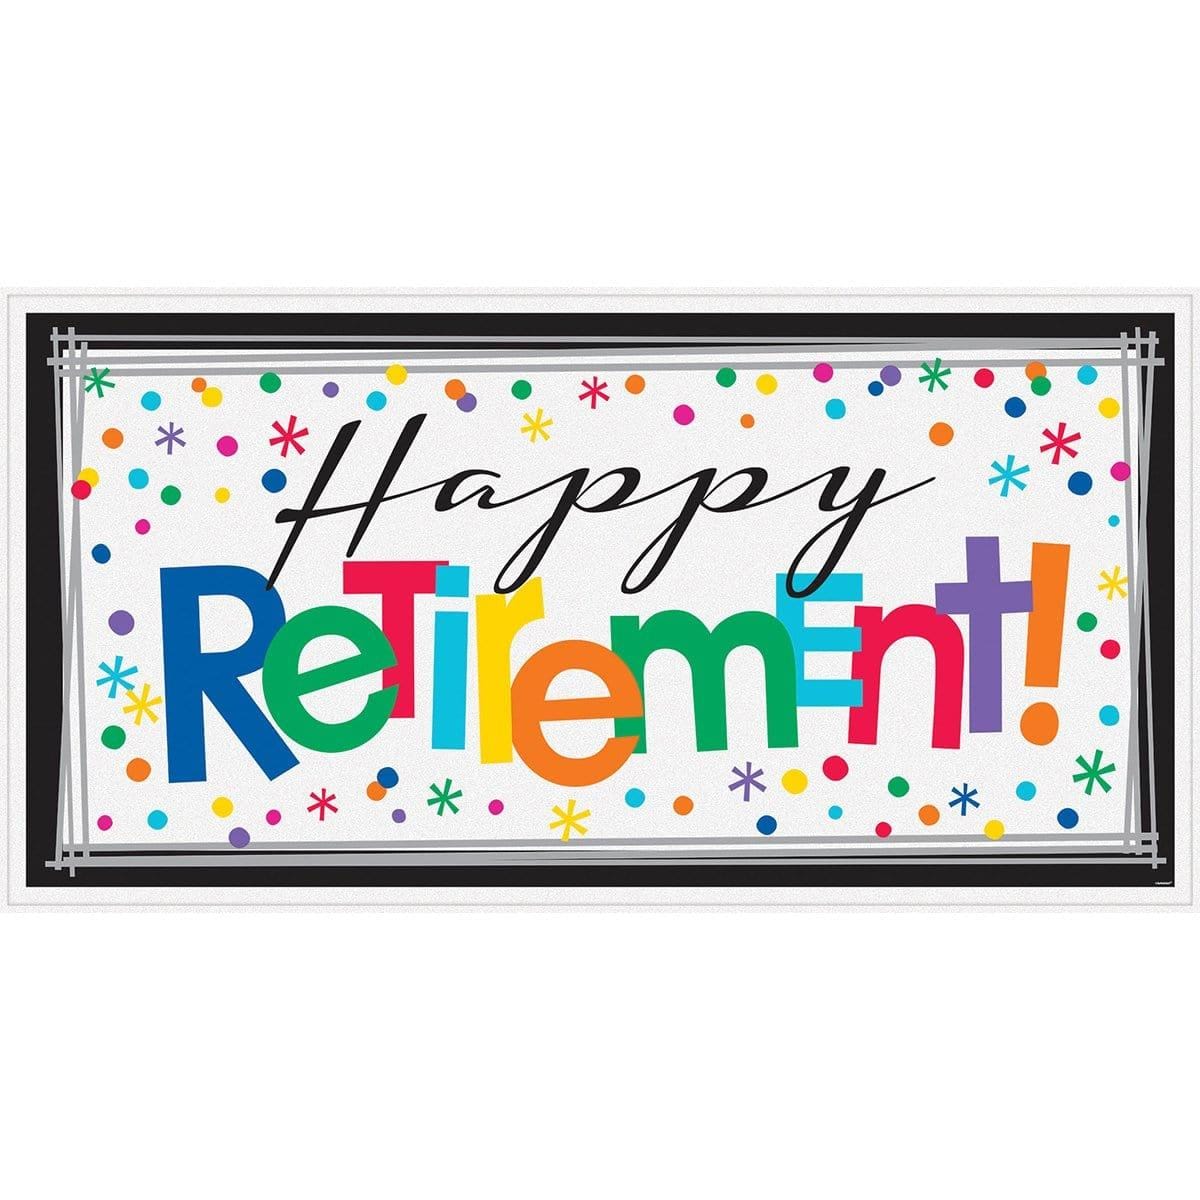 Buy Retirement Officially Retired - Banner 65 X 33 In. sold at Party Expert